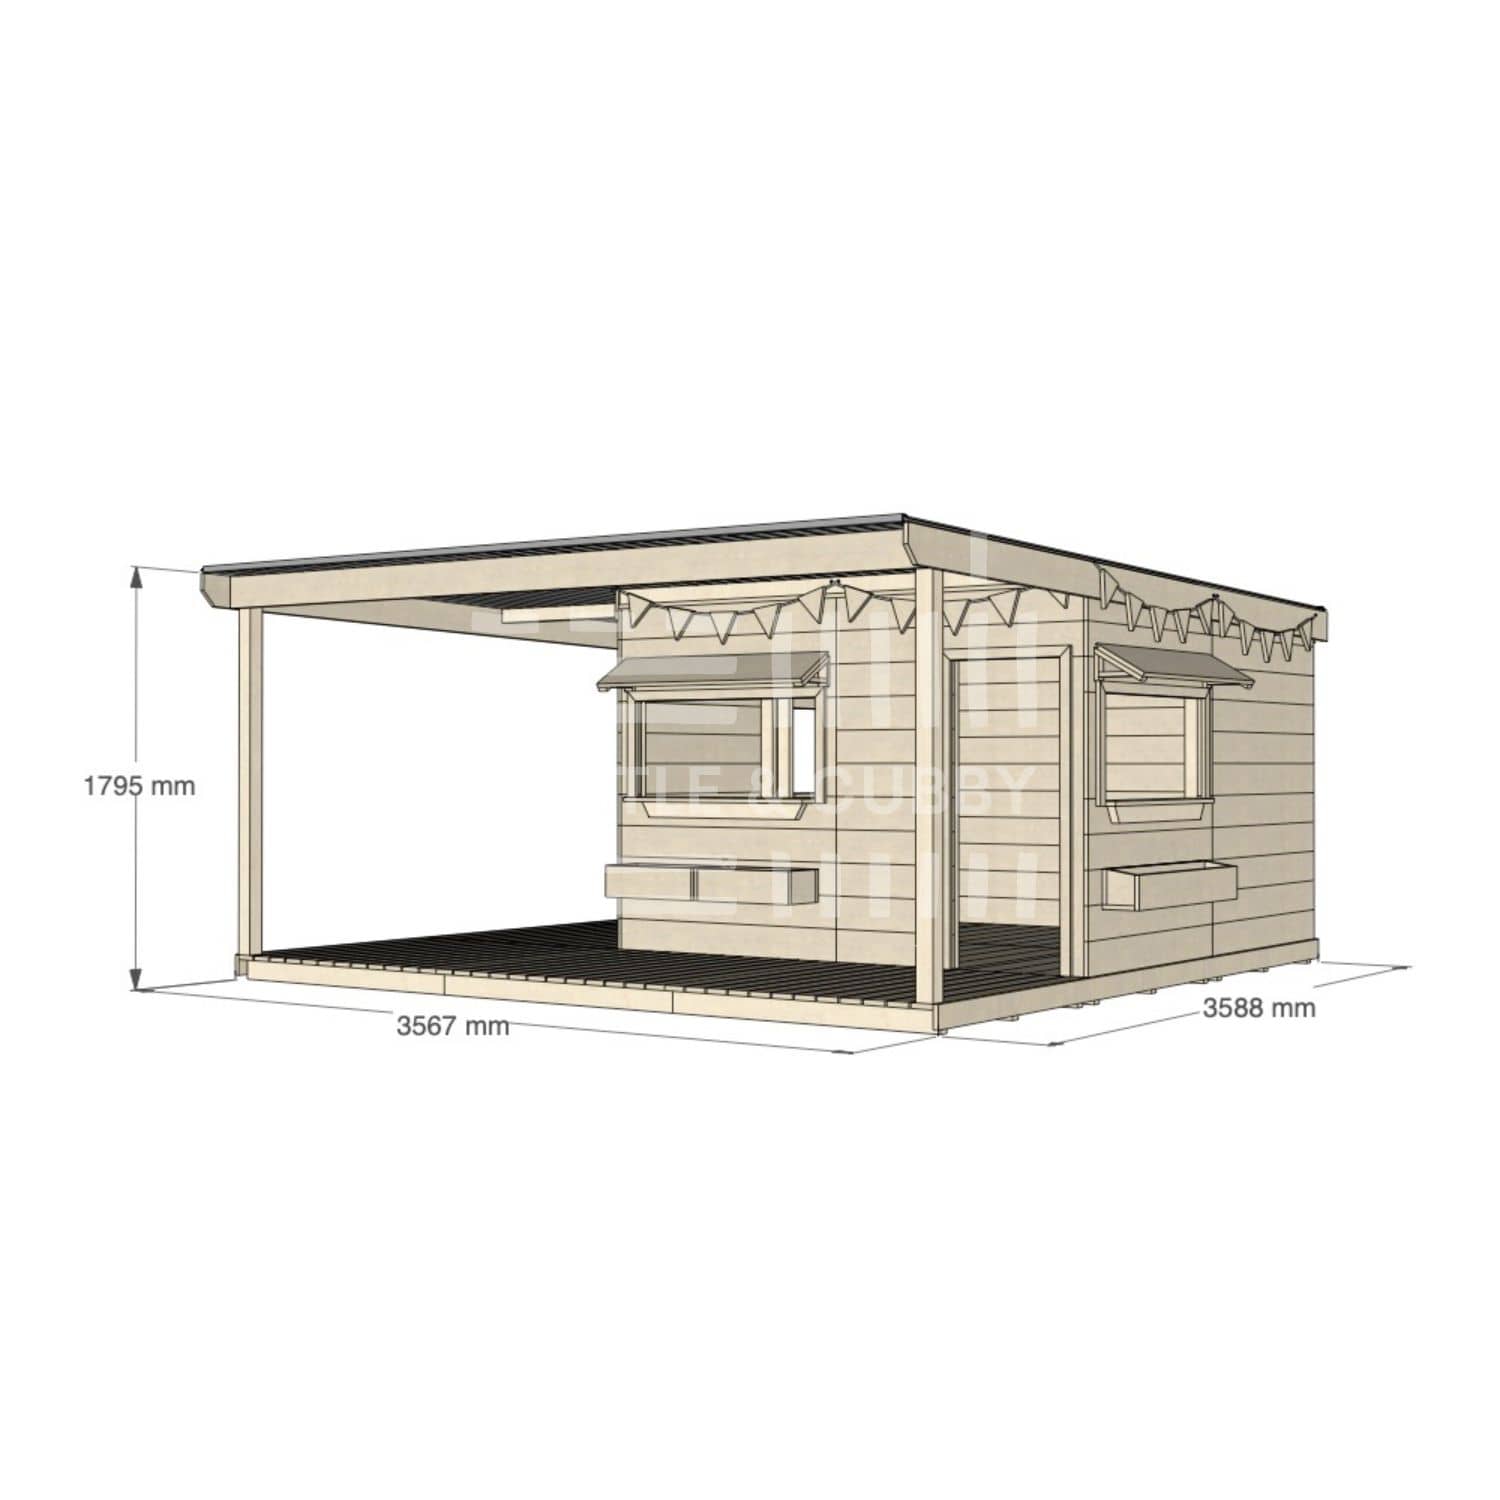 Commercial grade large square timber cubby house with wraparound verandah and accessories